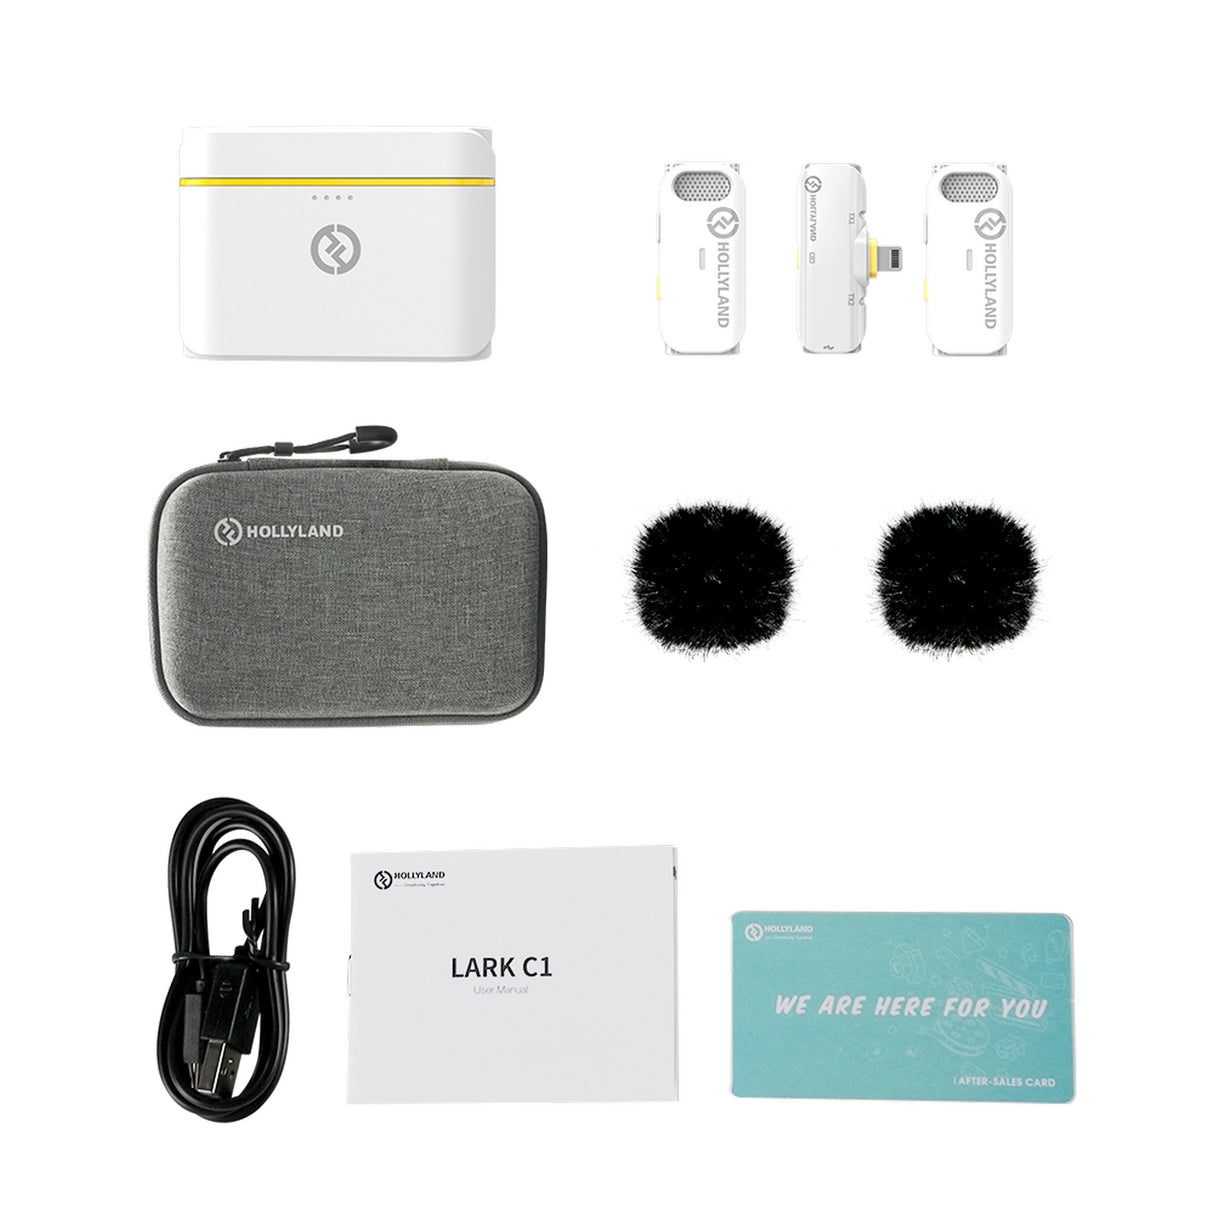 Hollyland Lark C1 Duo Wireless Lavalier Microphone for iPhone, Ivory White